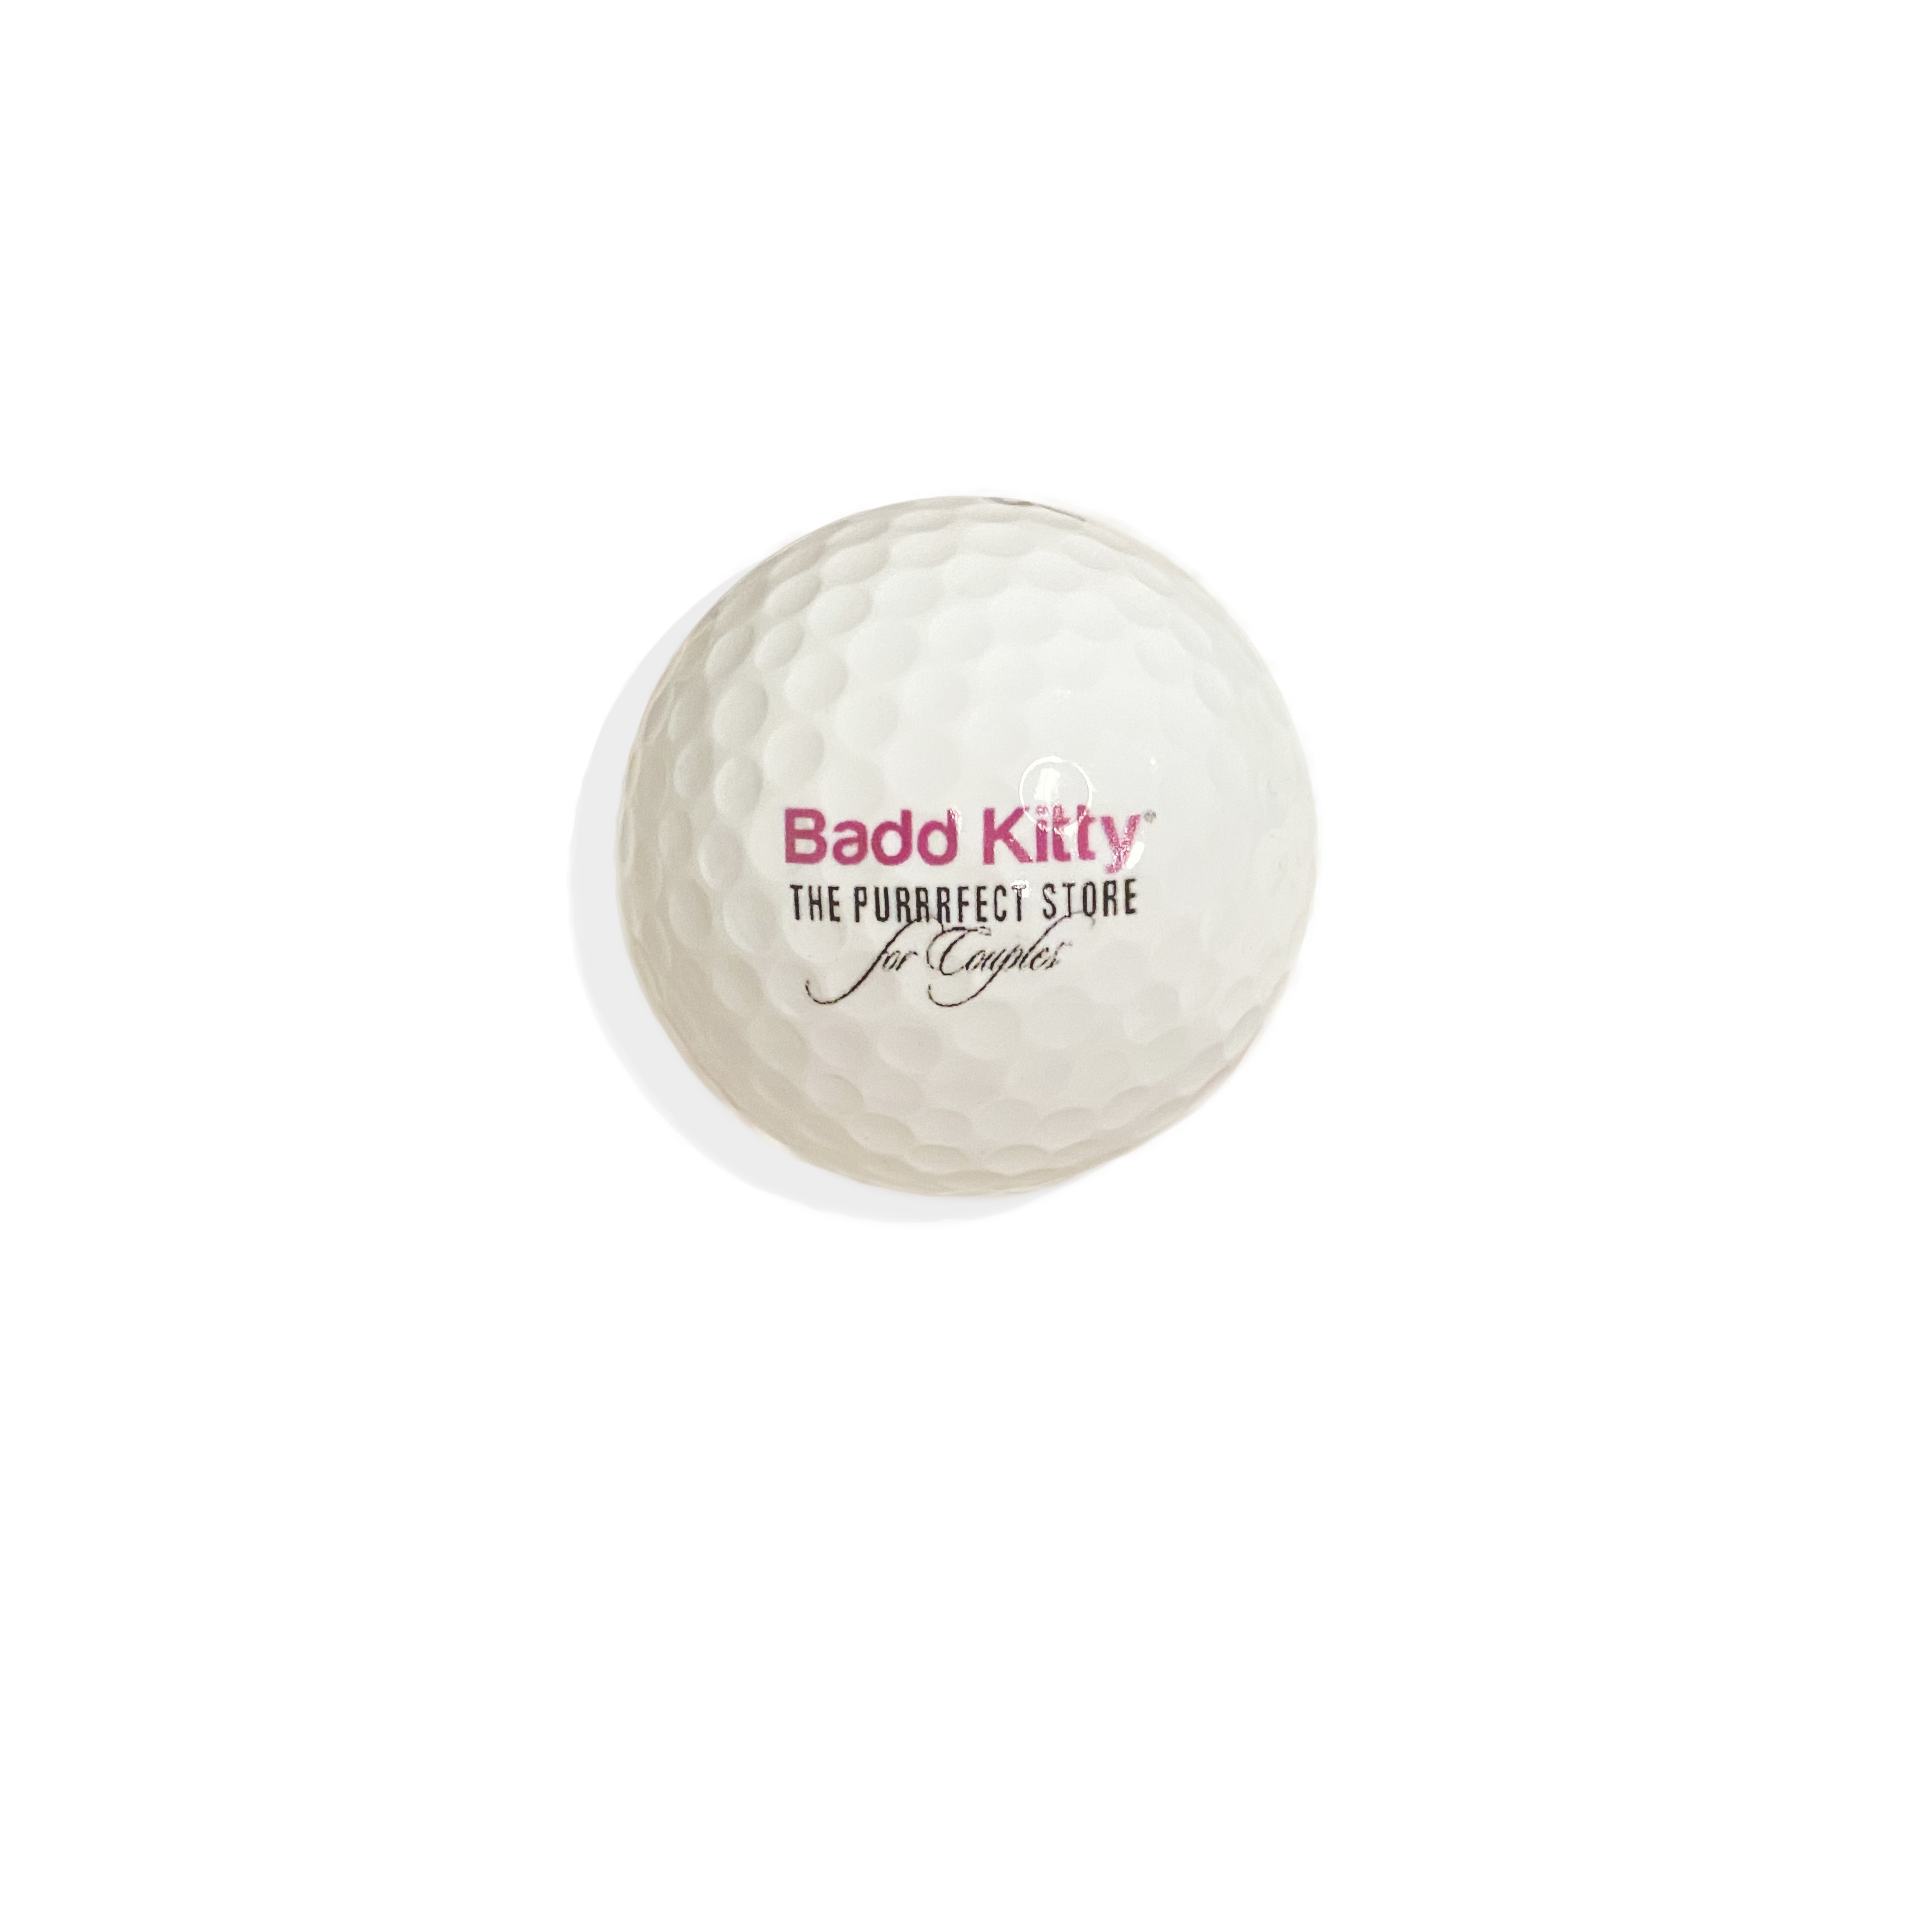 colin borden recommends Golf Ball Anal Beads